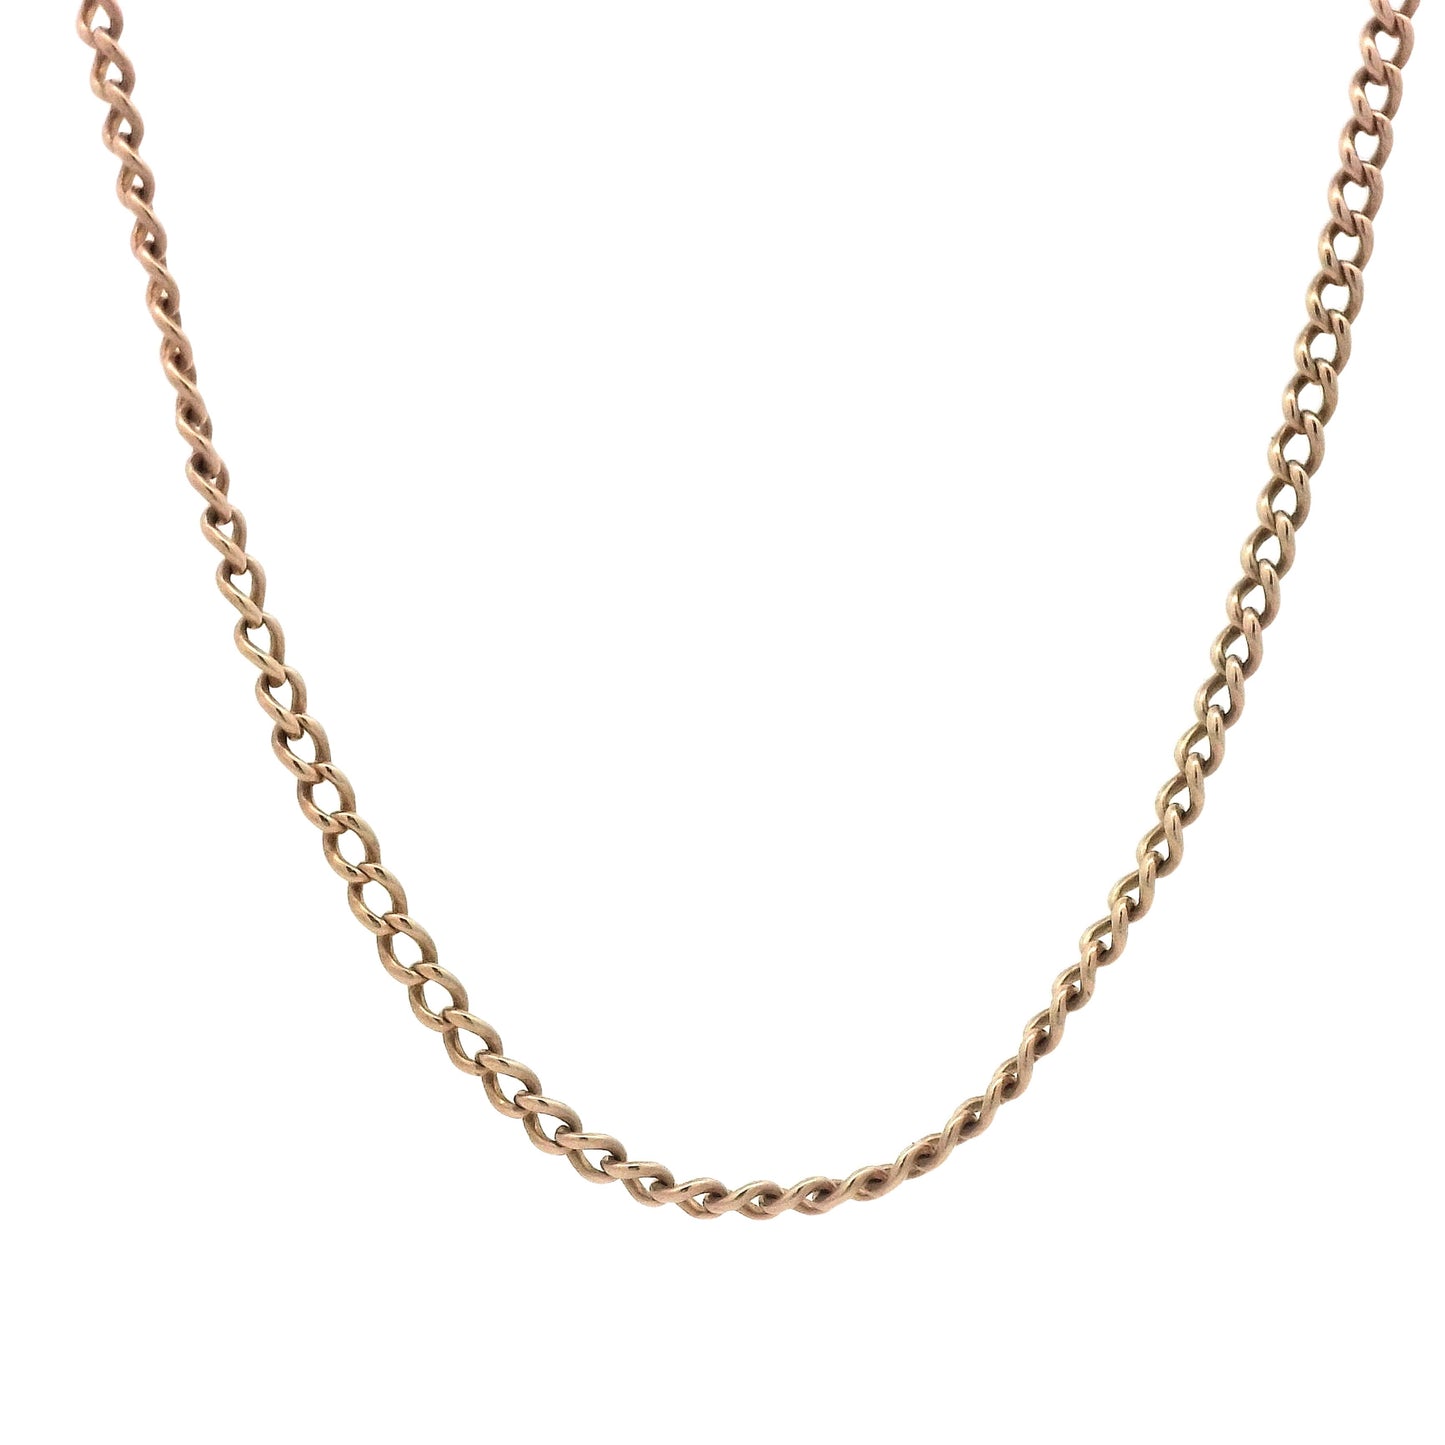 Antique Victorian 18 Inch Chain Necklace in 12k Gold